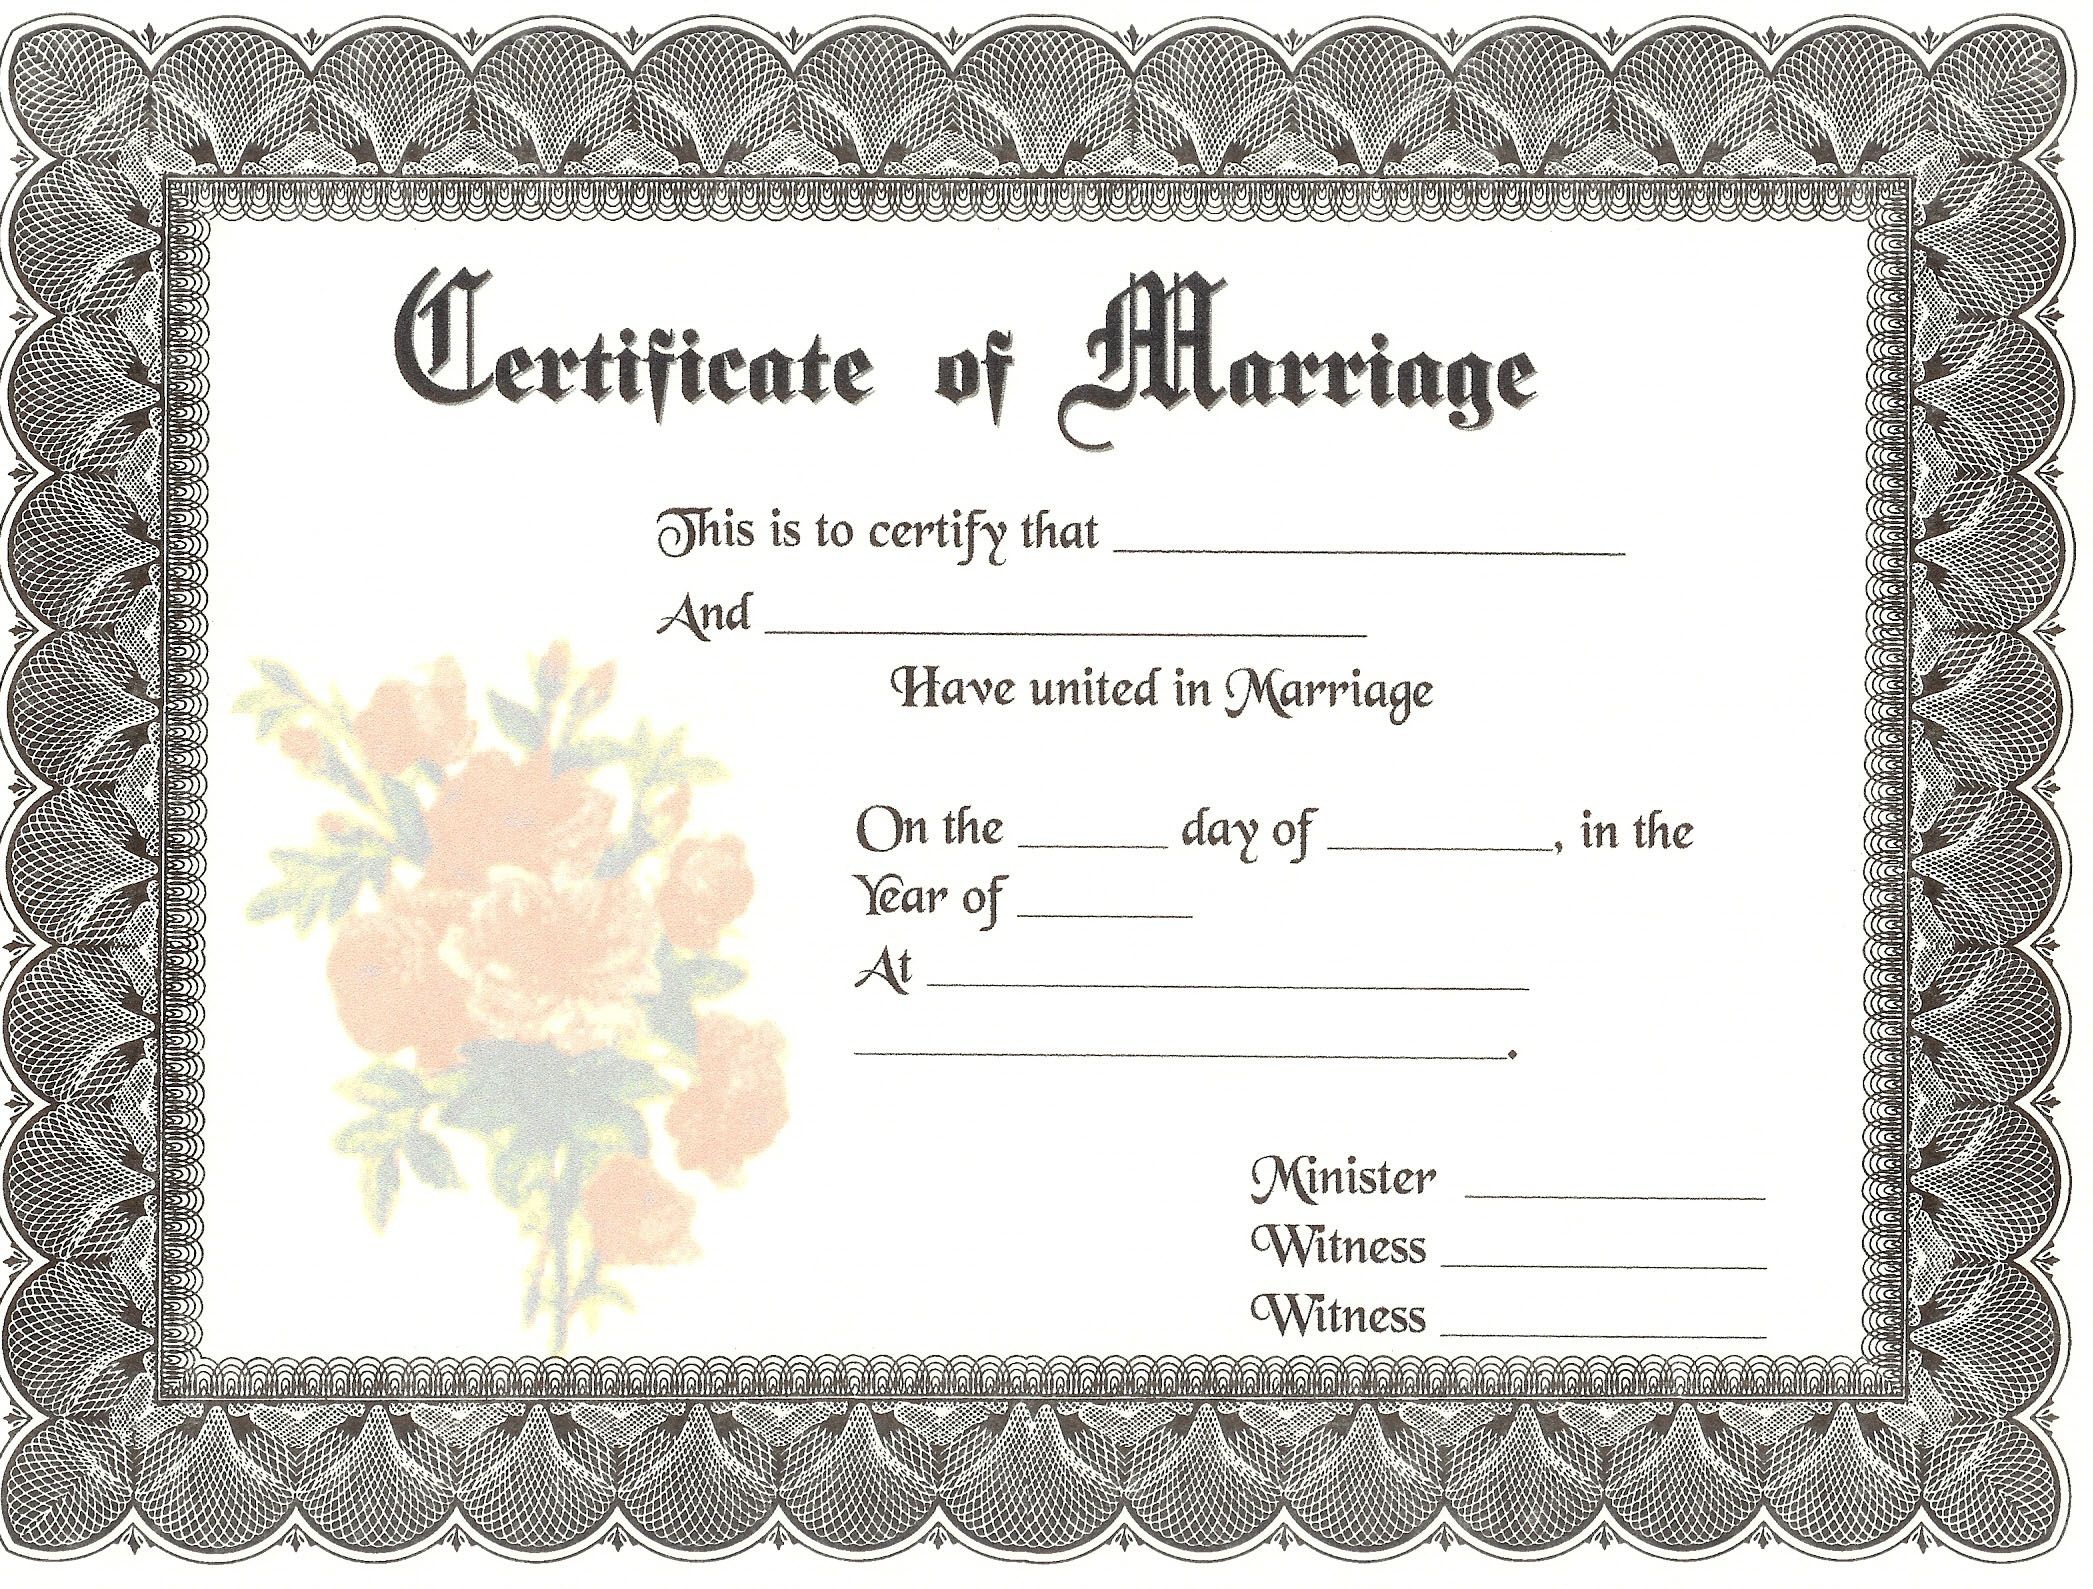 5 Fake Marriage Certificate Template Free Lbl Home Defense Products 